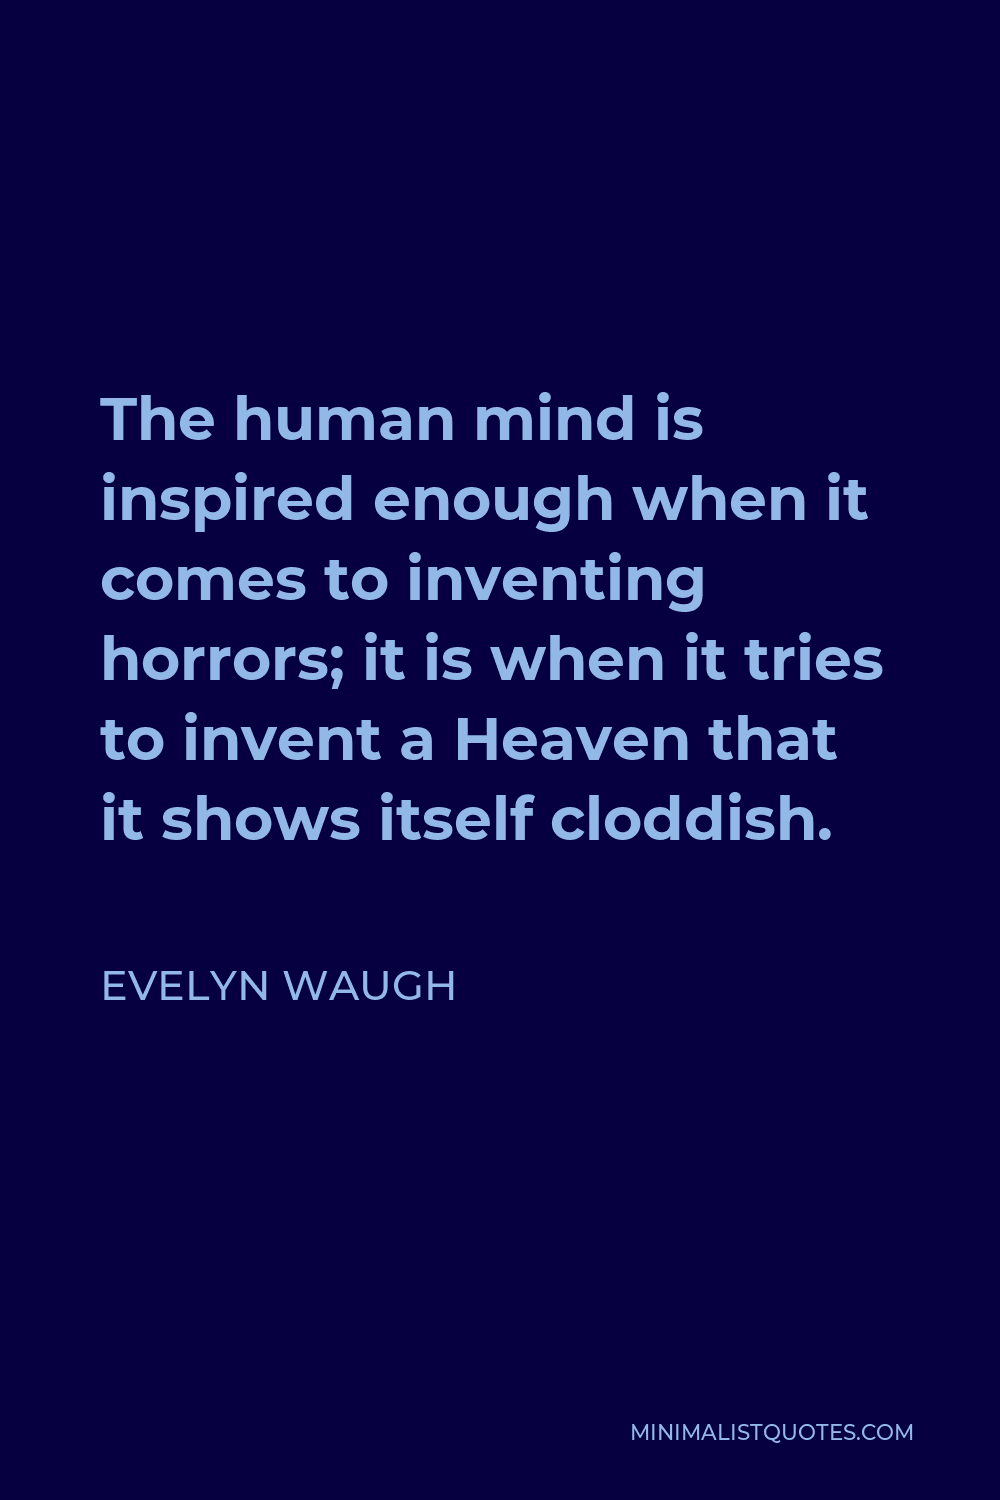 Evelyn Waugh Quote - The human mind is inspired enough when it comes to inventing horrors; it is when it tries to invent a Heaven that it shows itself cloddish.